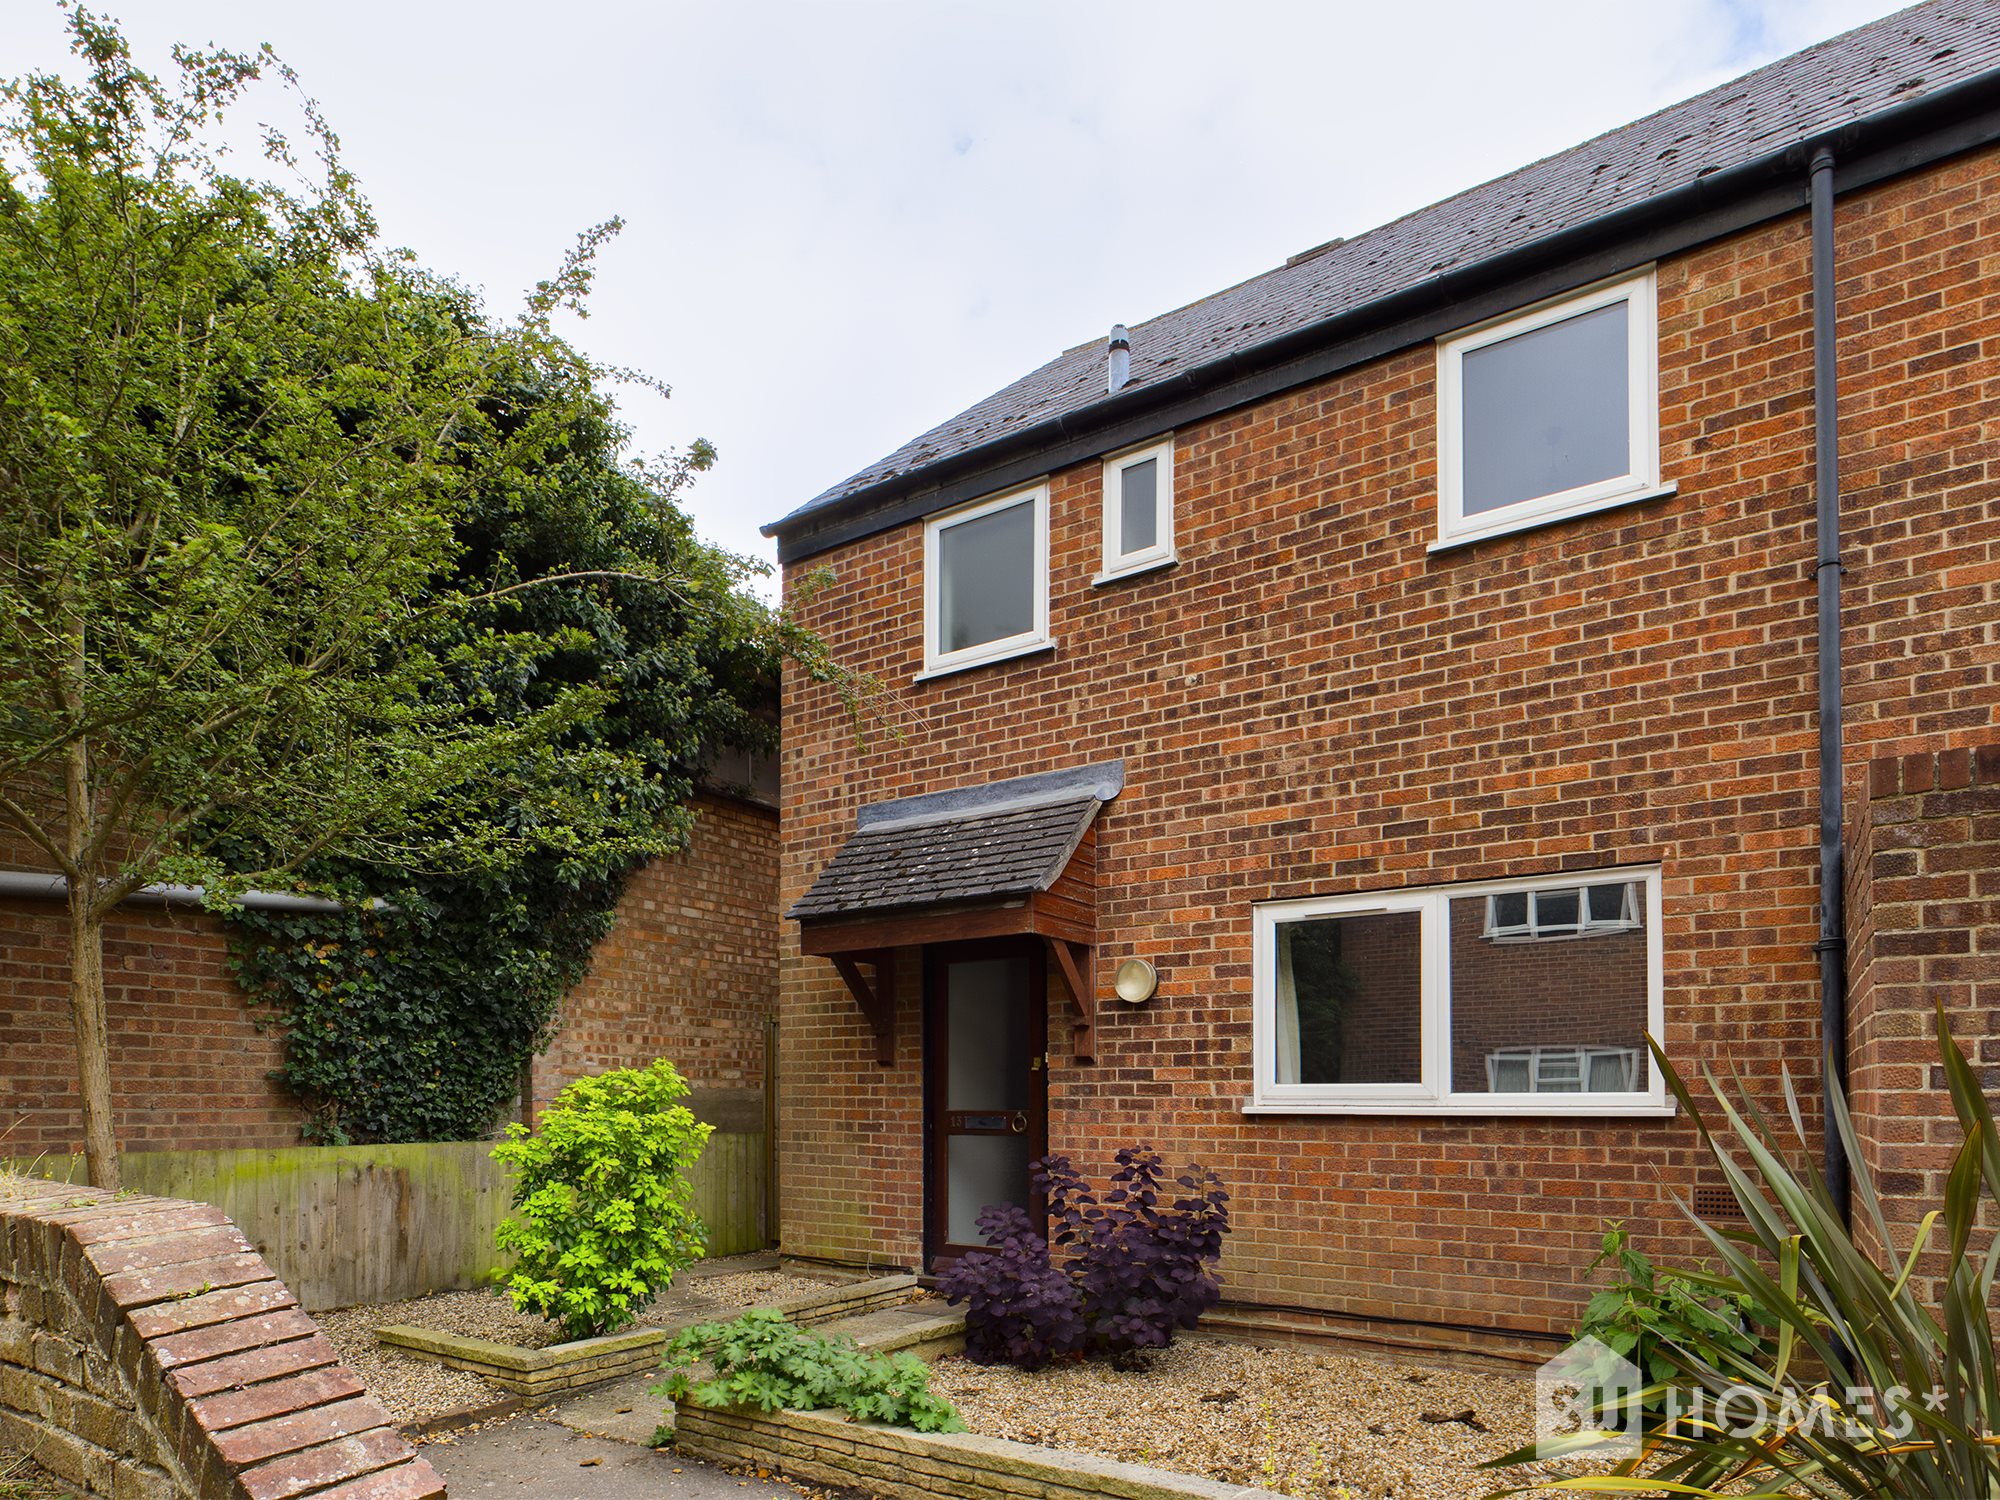 4 bed house to rent in Goodey Close, Colchester - Property Image 1